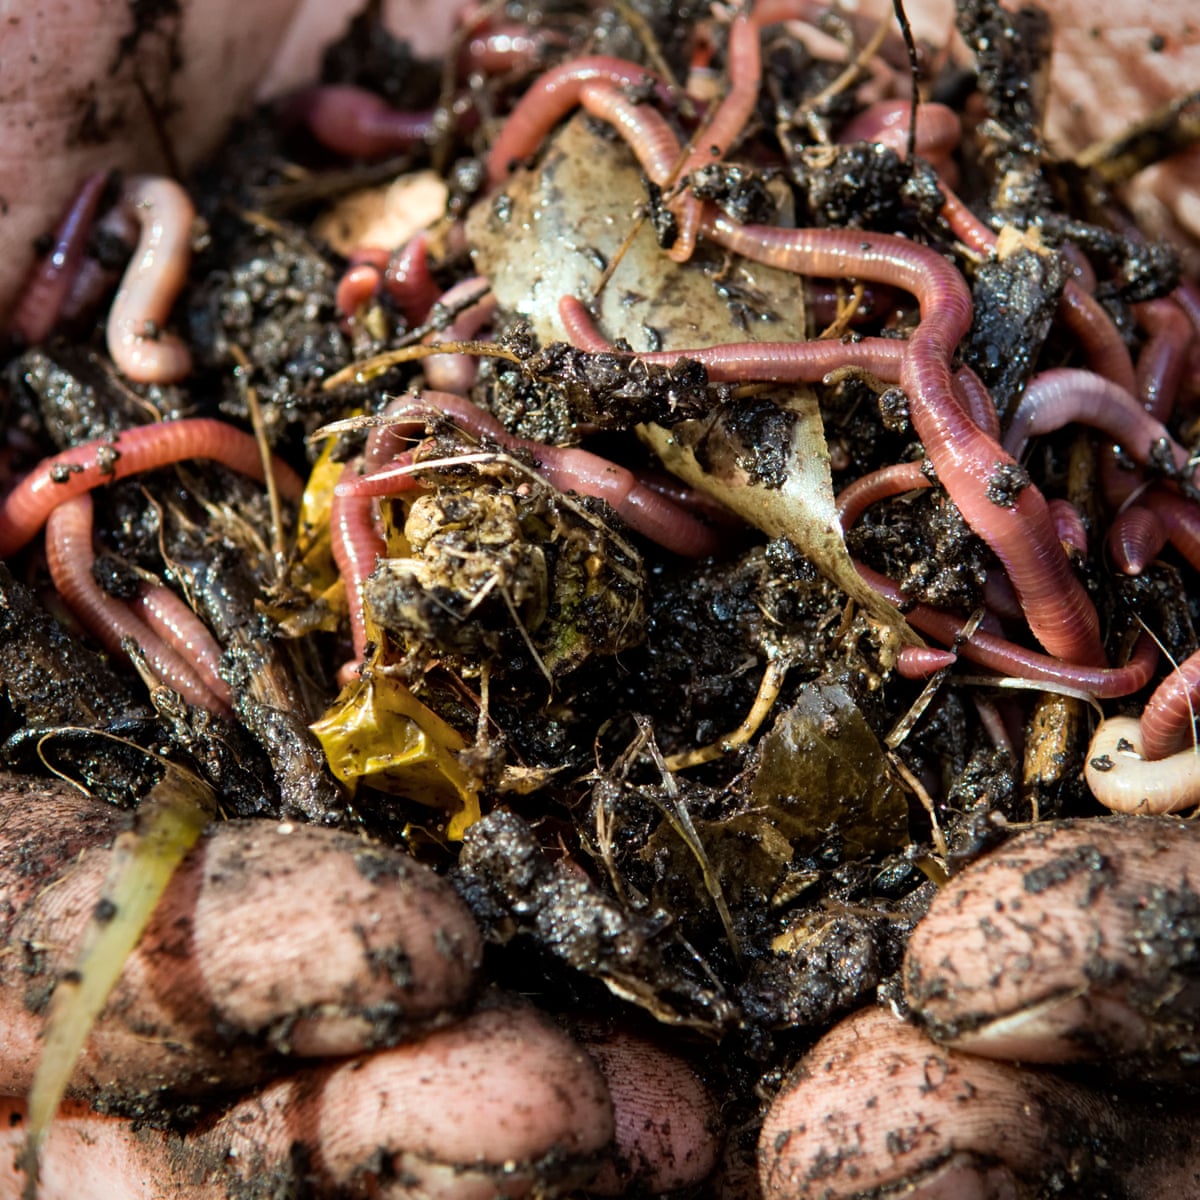 Vital for looking after the soil': fears as UK earthworm population  declines, Animals